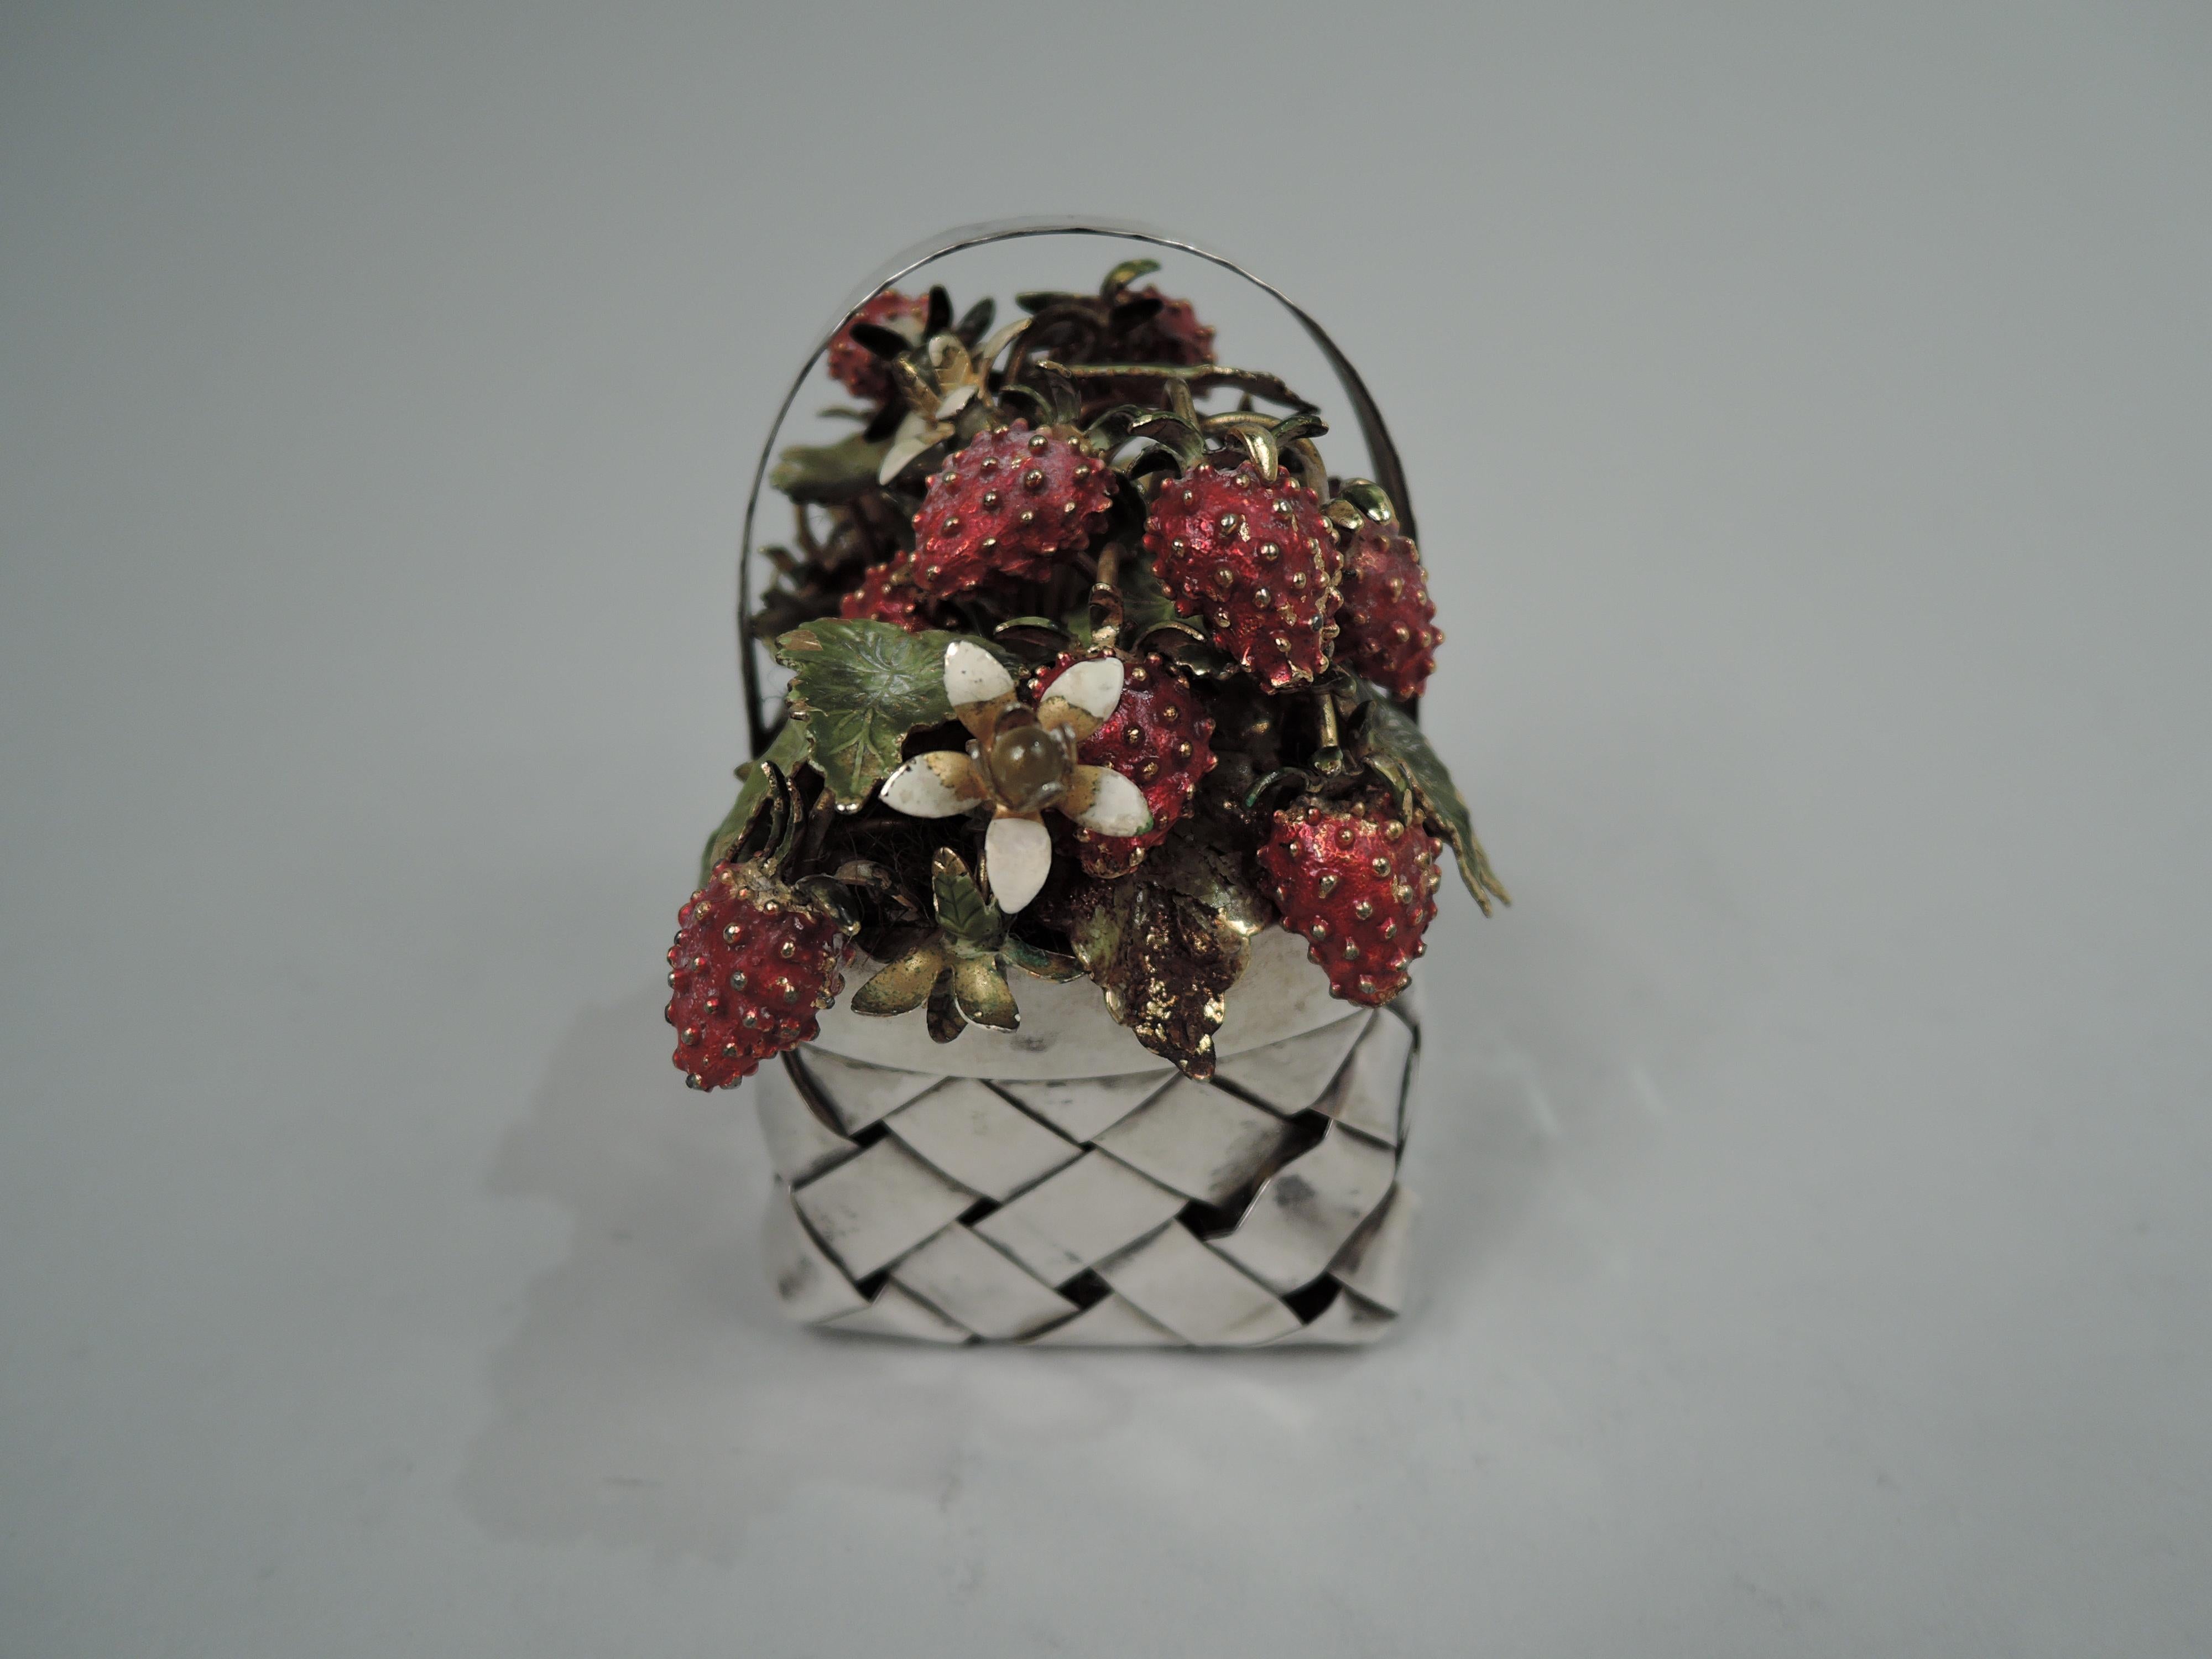 Midcentury Modern sterling silver basket. Retailed by Cartier in New York. Rectangular with straight sides. Plain rim and fixed c-scroll handle with “stitched” rims. Woven strips. Overflowing gilt-enameled strawberry plants with lush fruit and